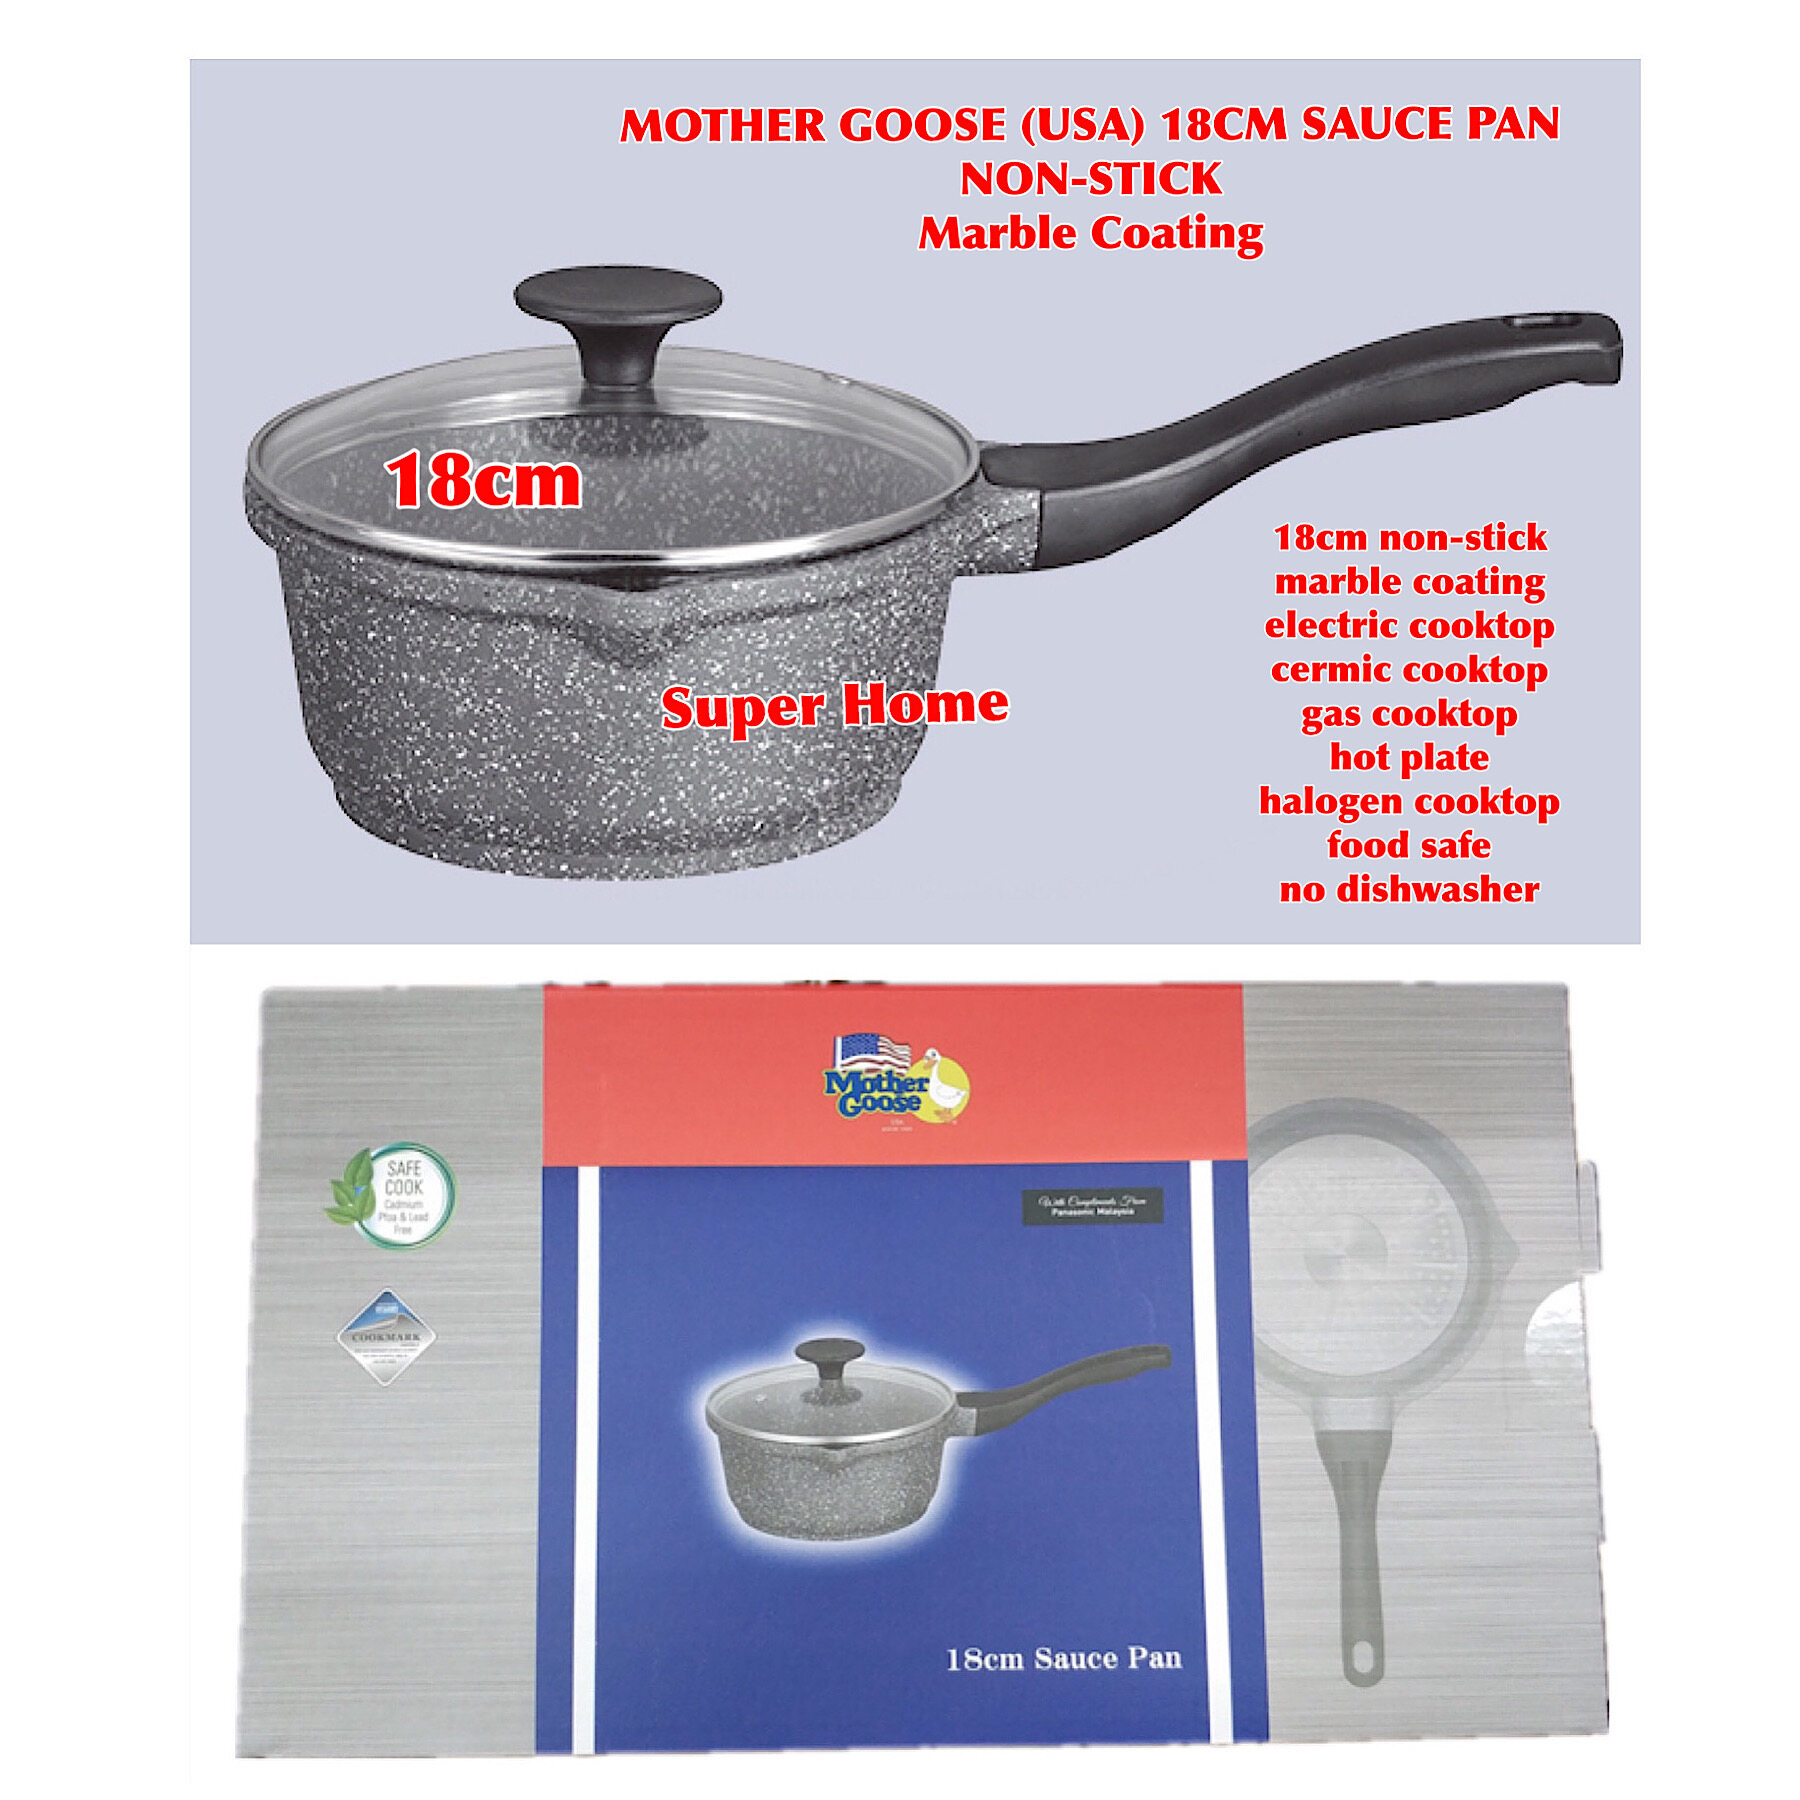 MOTHER GOOSE (USA) 18cm Sauce Pan Non-Stick - Marble Coating